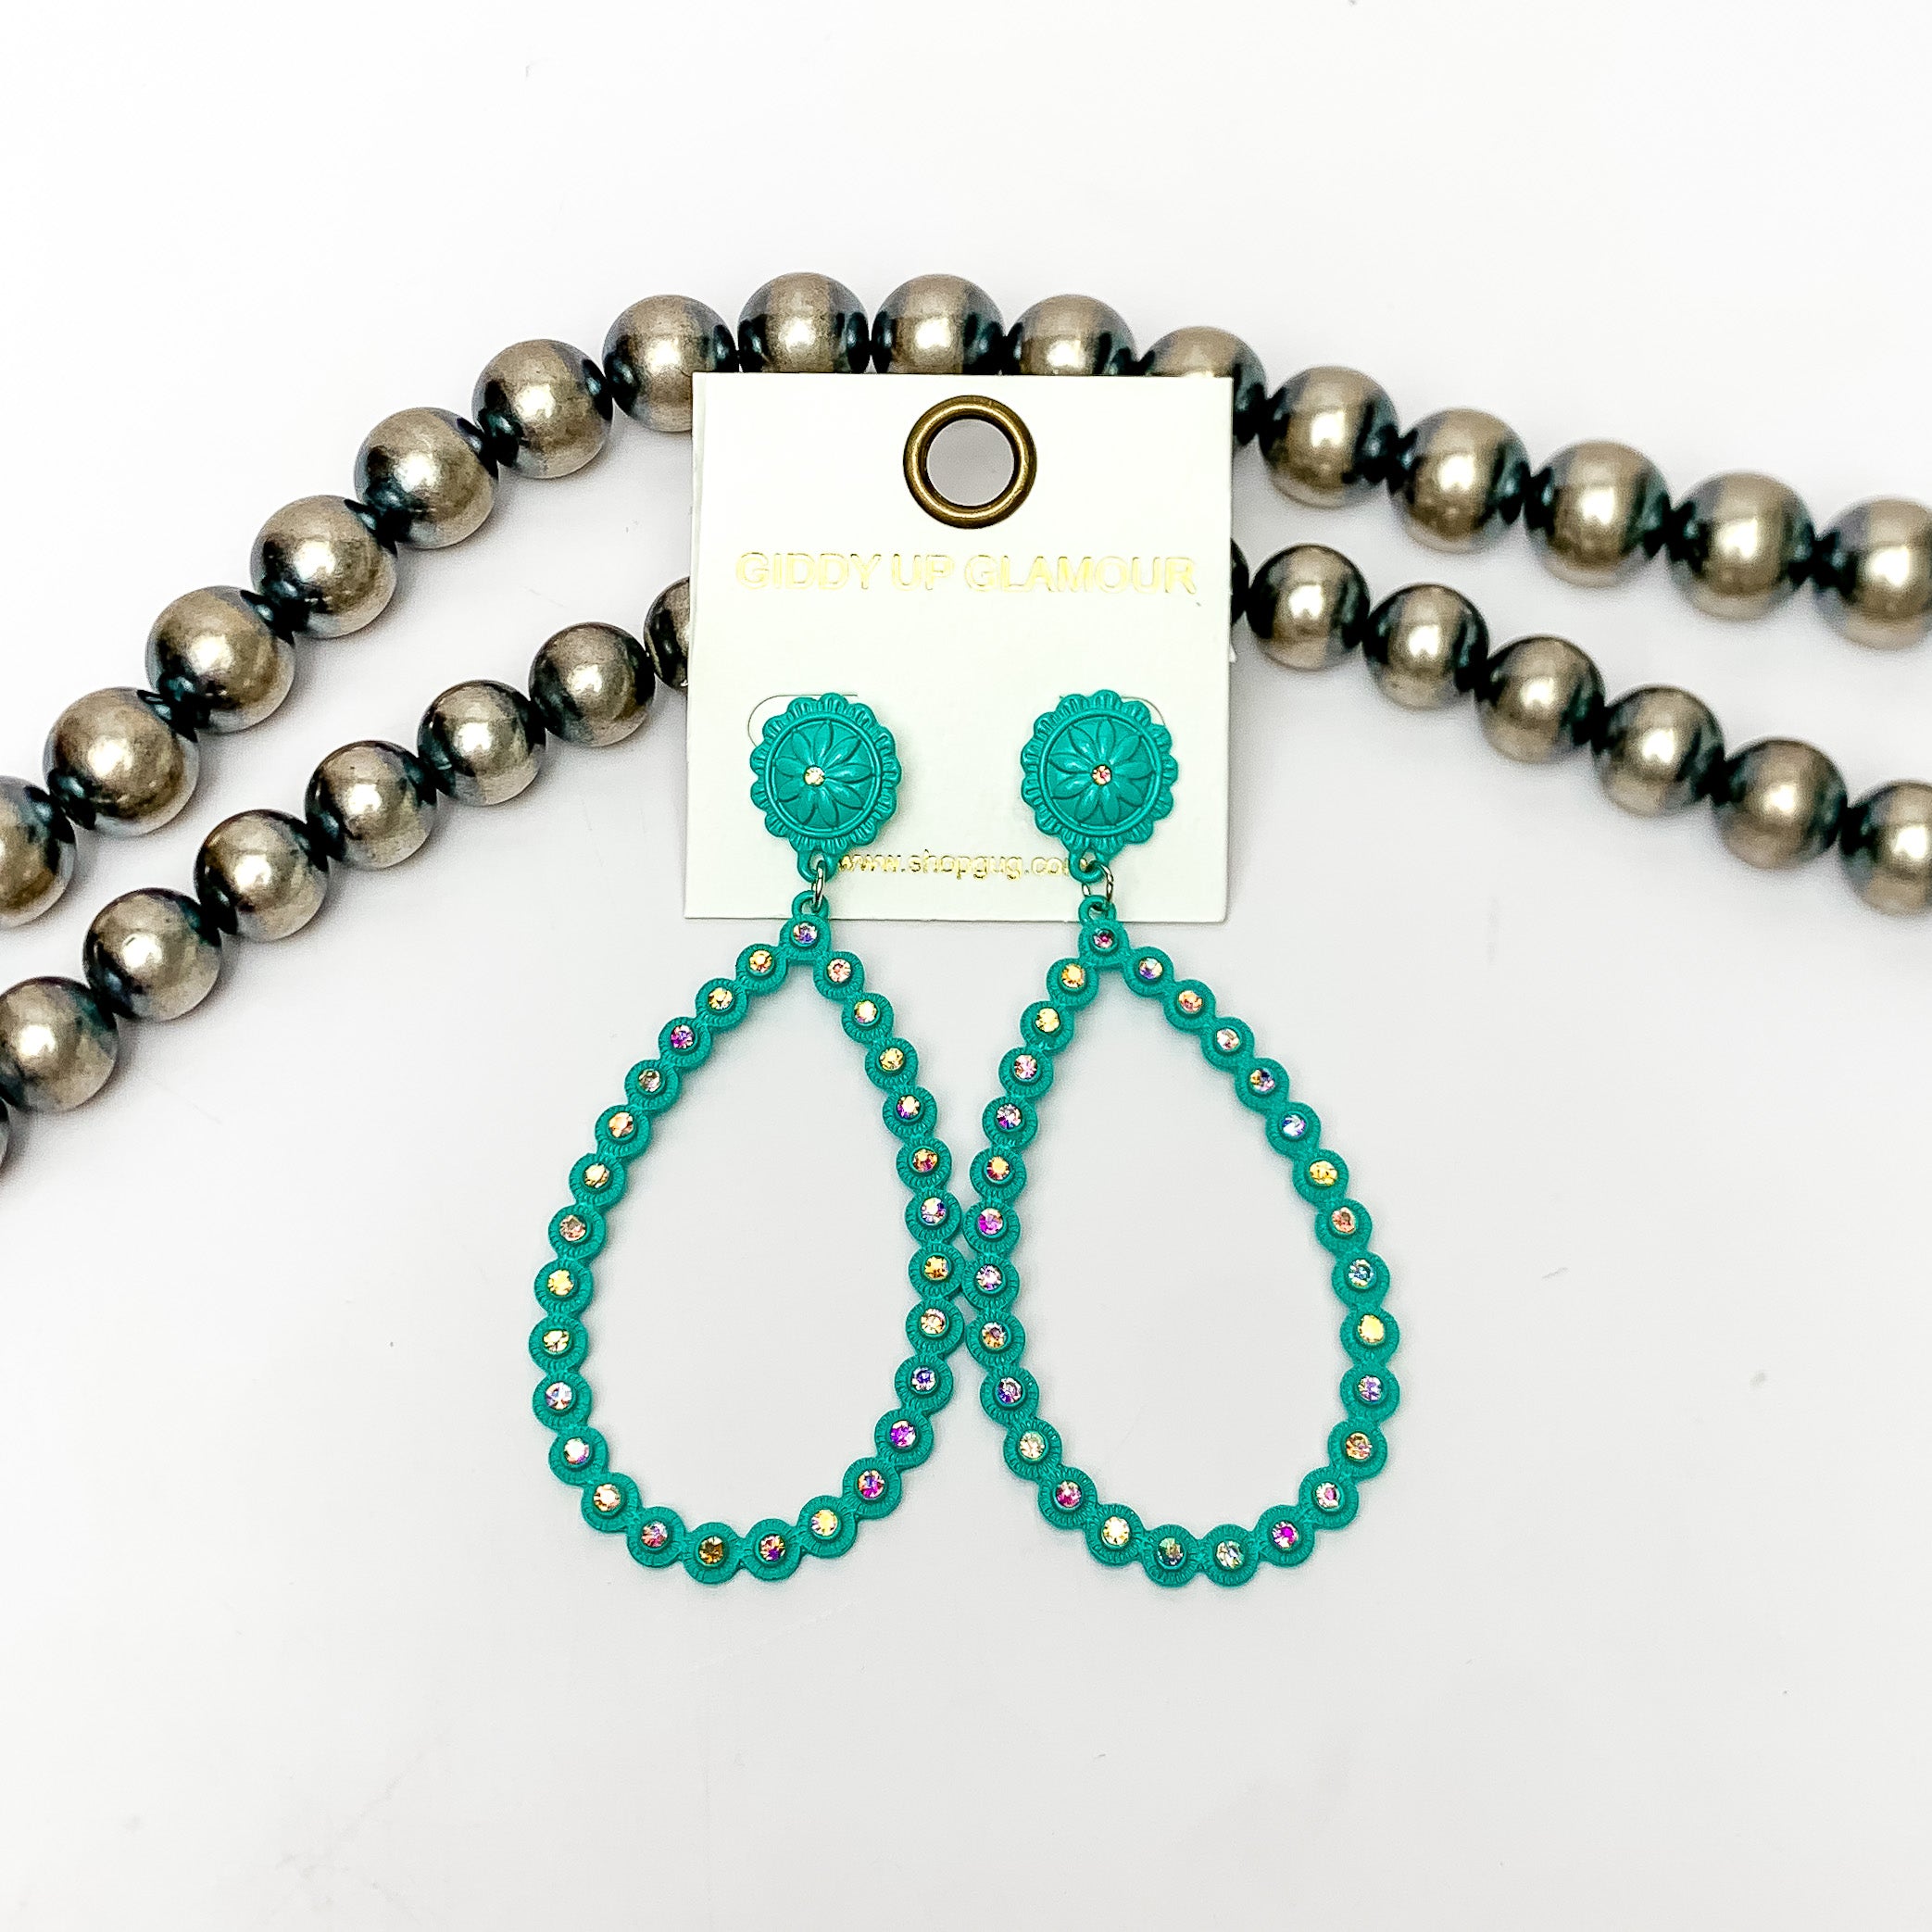 AB Crystal Open Teardrop Earrings in Turquoise Blue. These open ab crystal teardrop earrings are pictured on a white background with Navajo pearls behind the earrings.